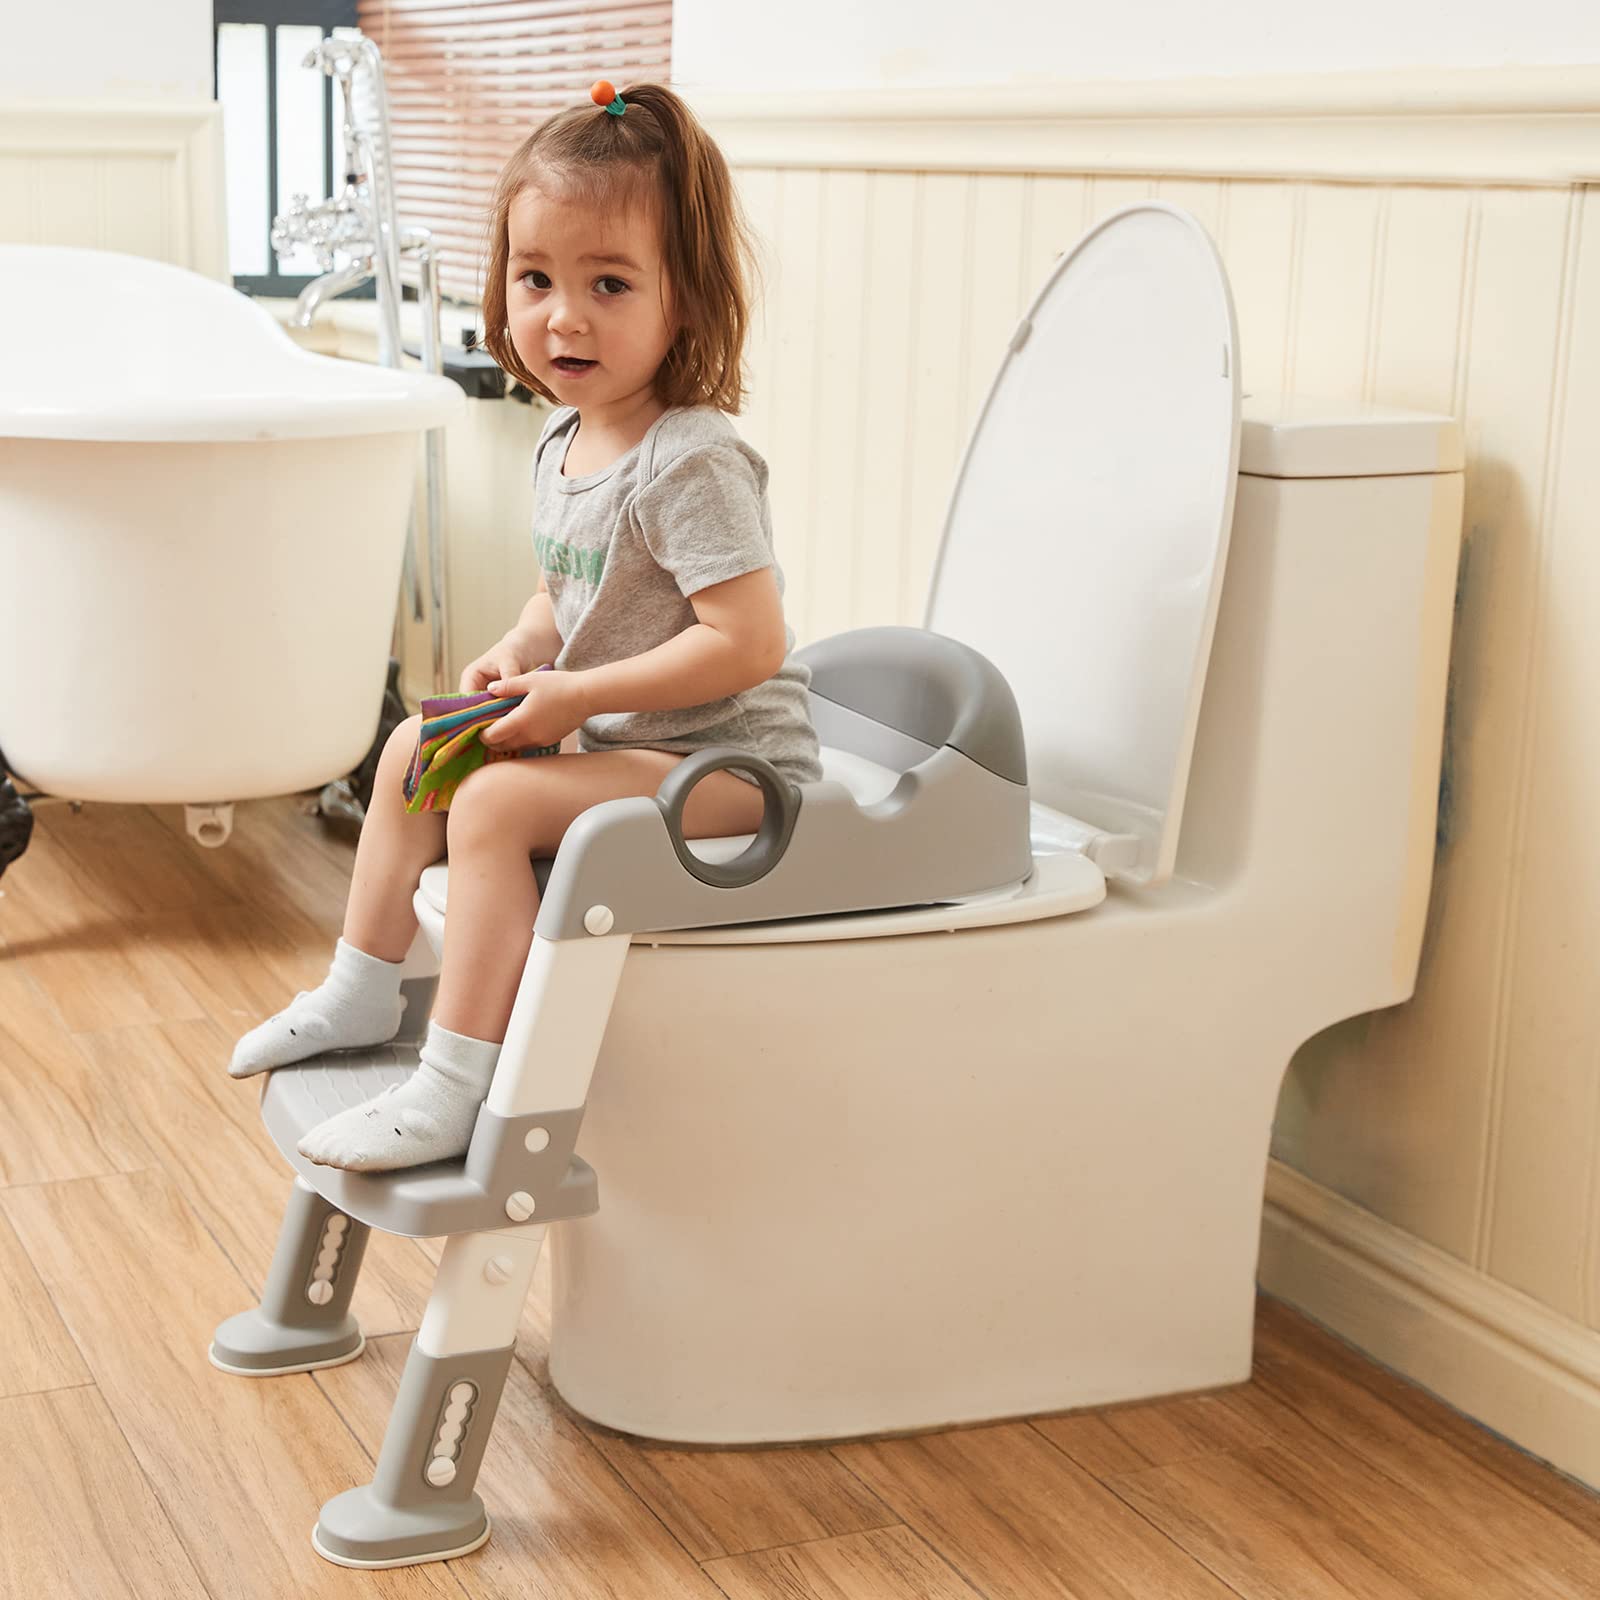 baby toilet seat or potty Toilet baby seat potty child chair ladder step kids trainer folding adjustable stool children toilettes